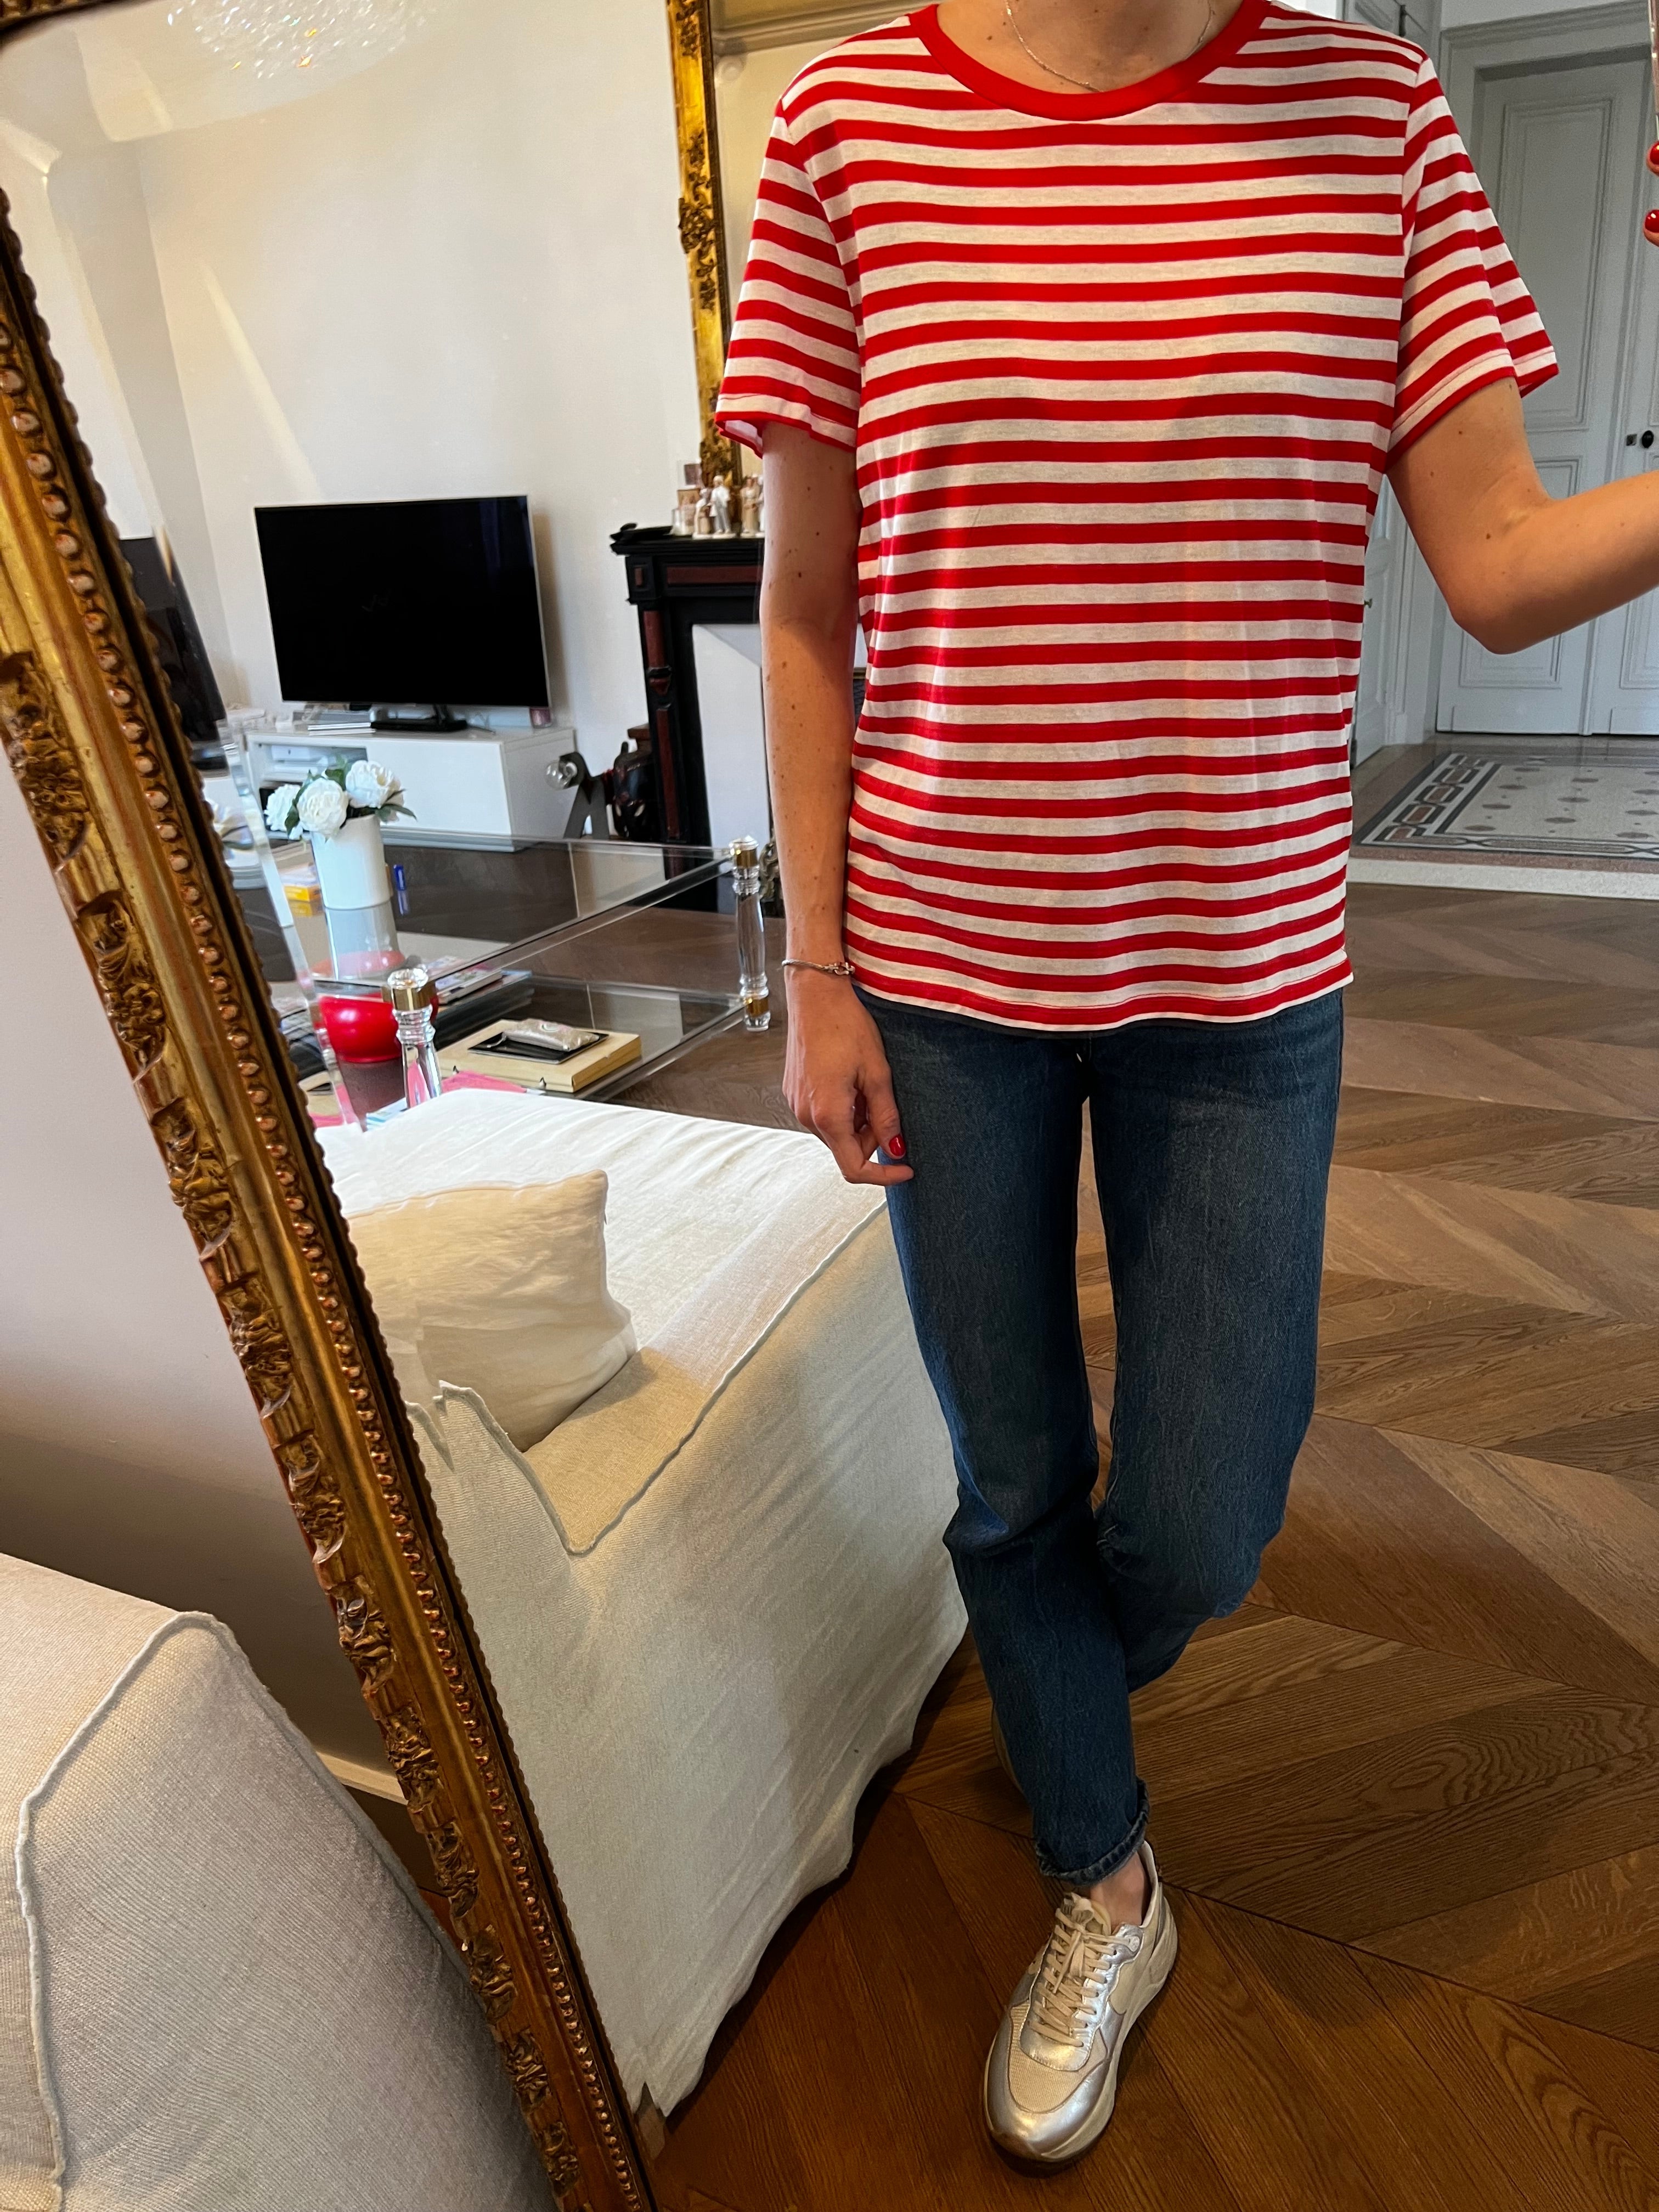 Ariane Brodier T shirt Monki Neuf à rayures blanches et rouge 